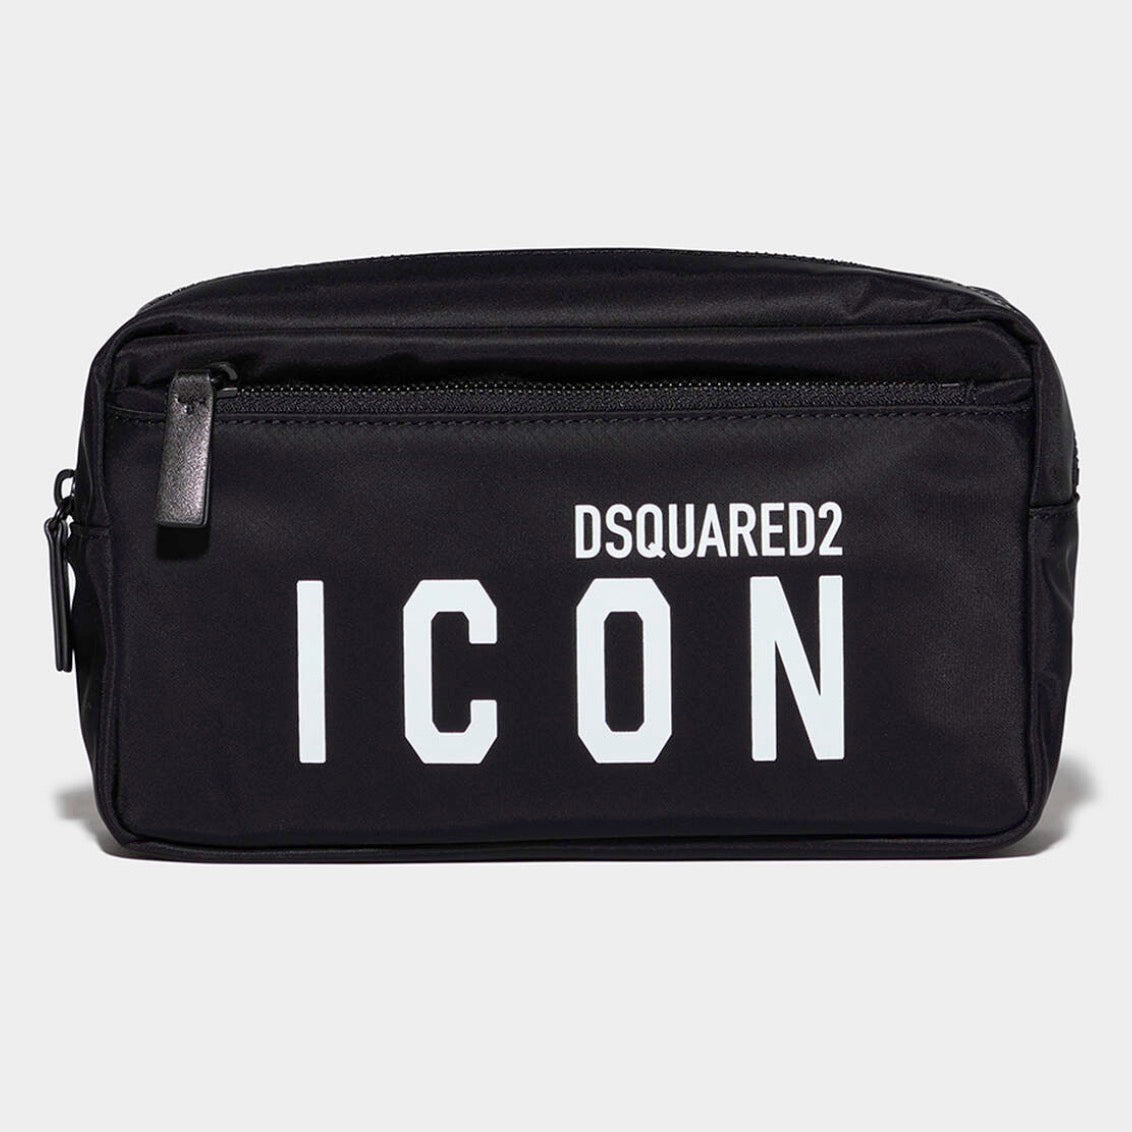 Liven up your accessories with this beauty case featuring a contrasting DSQUARED2 ICON print. It is packed with interior pockets and zips for all your grooming and travel essentials.